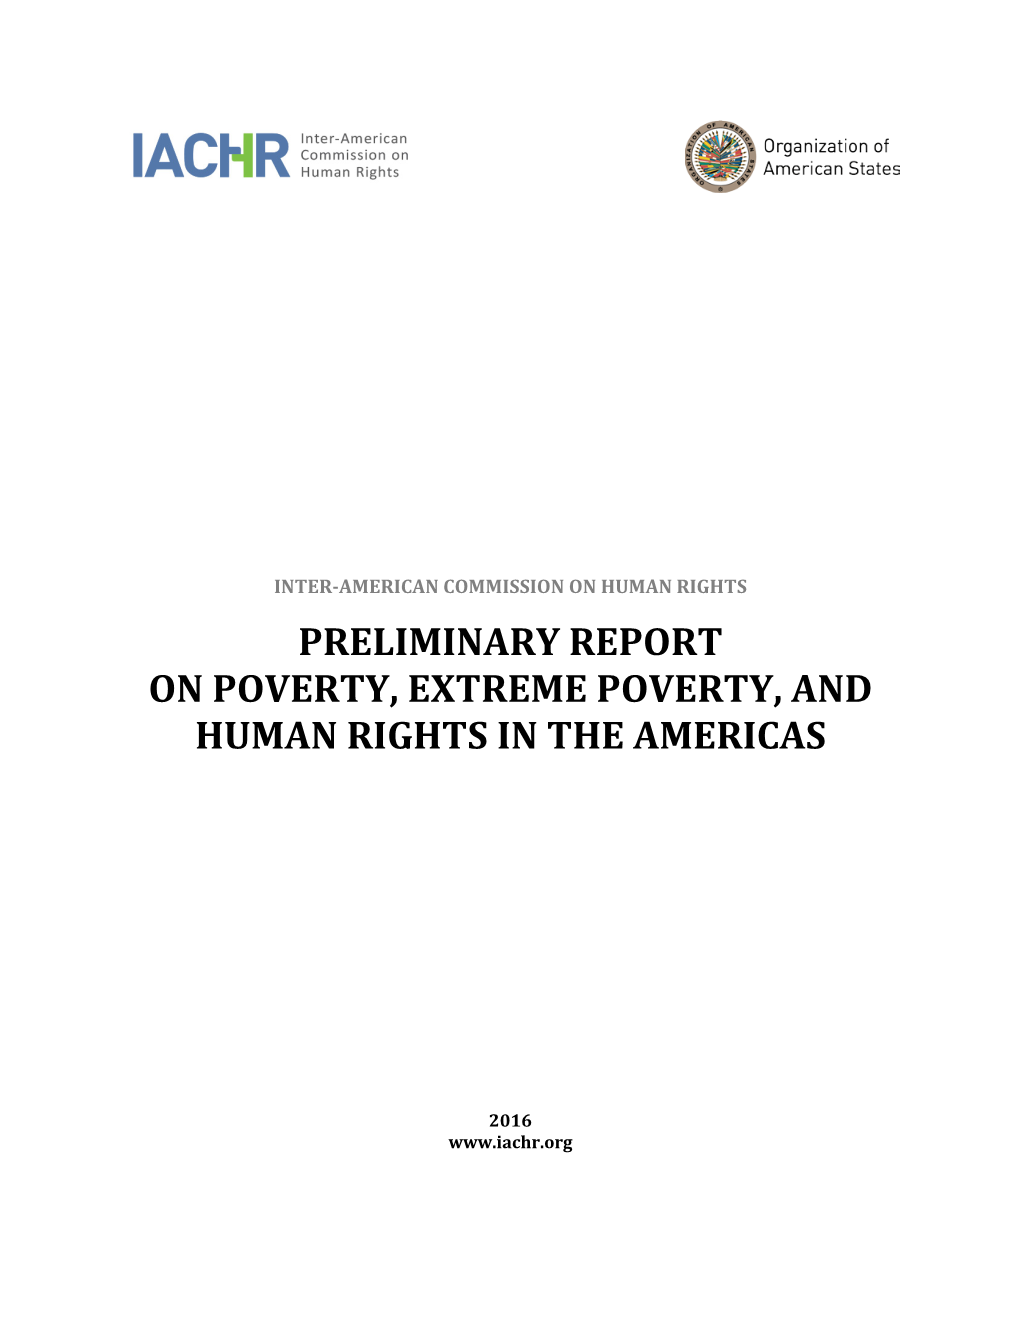 I. Legal Framework and the Conceptualization of Poverty and Extreme Poverty